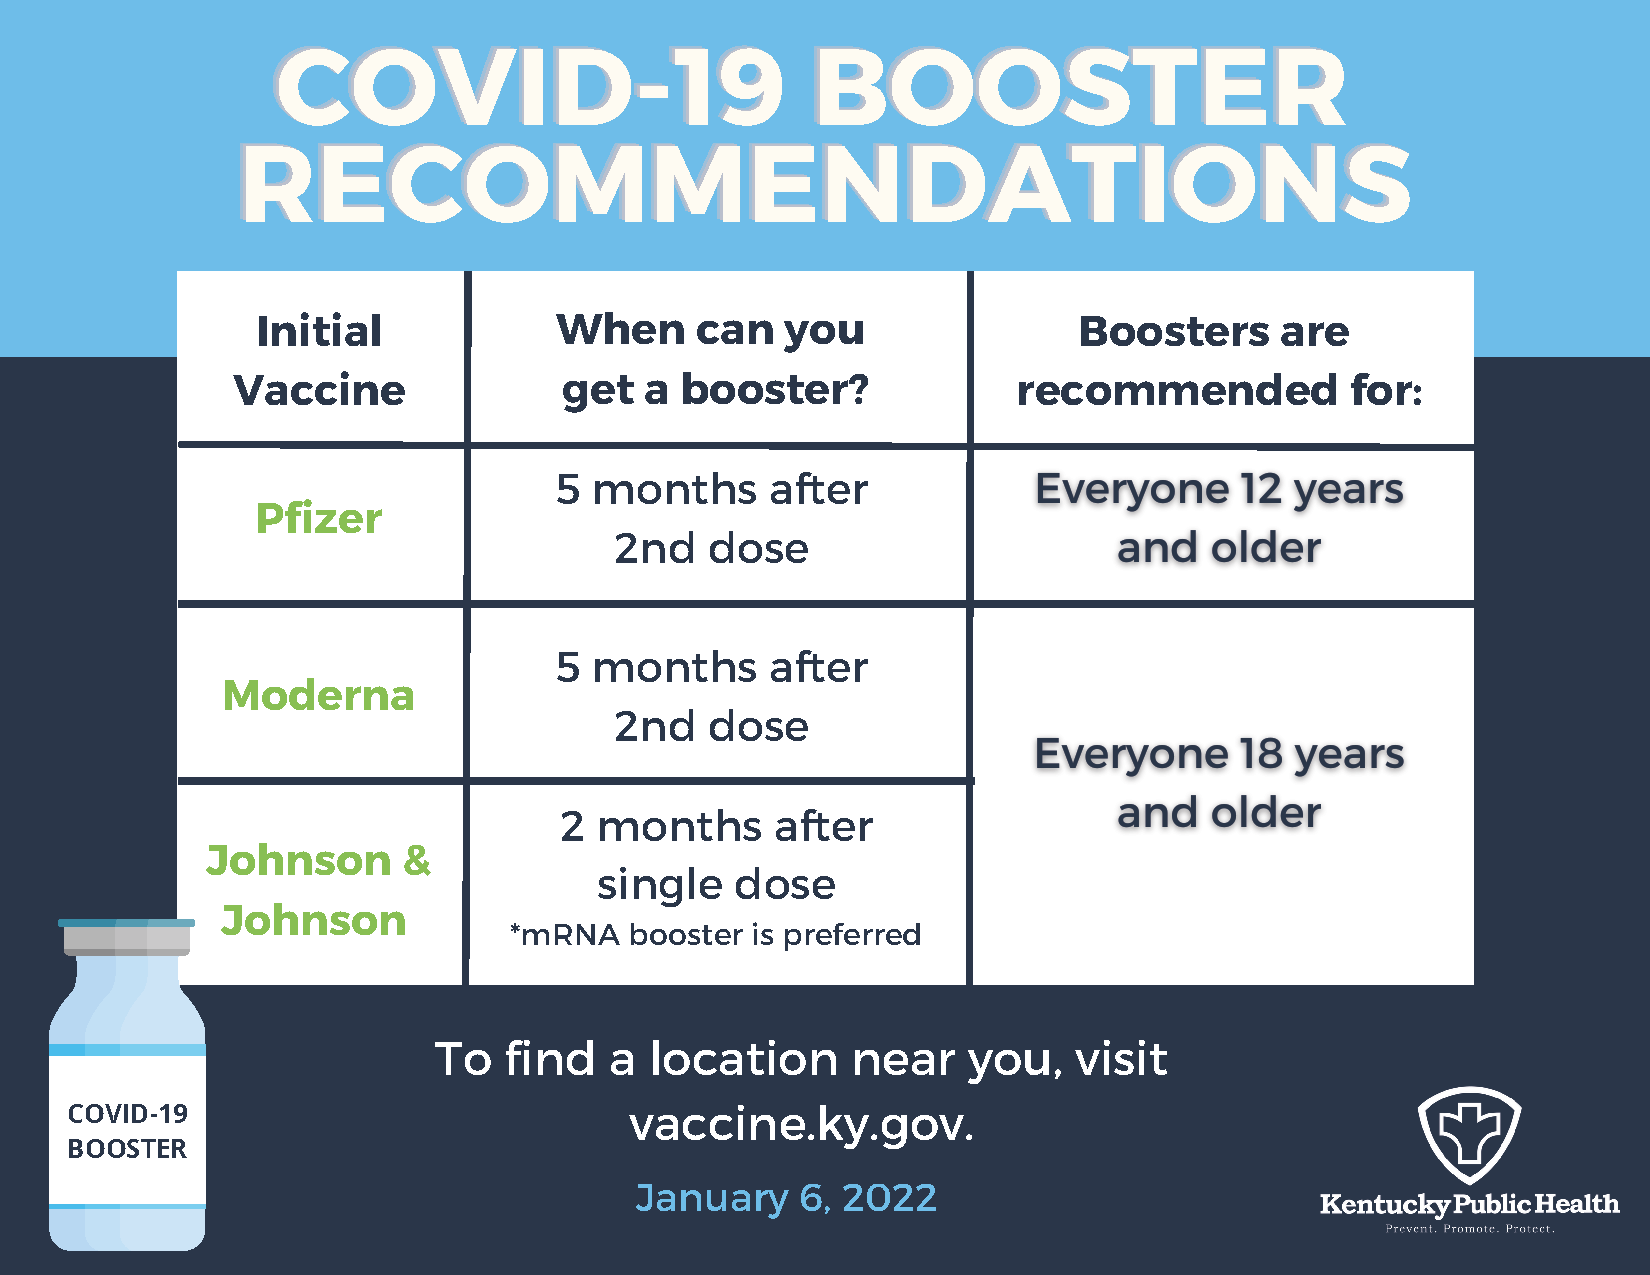 COVID-19 Booster Recommendations: Pfizer 5 months after your 2nd dose, and if you are 12 years or older.  Monderna, 5 months after your 2nd dose, and if you are 18 years or older. Johnson and Johnson, 2 months after your single does, and if you are 18 years or older. Visit vaccine.ky.gov to find a location